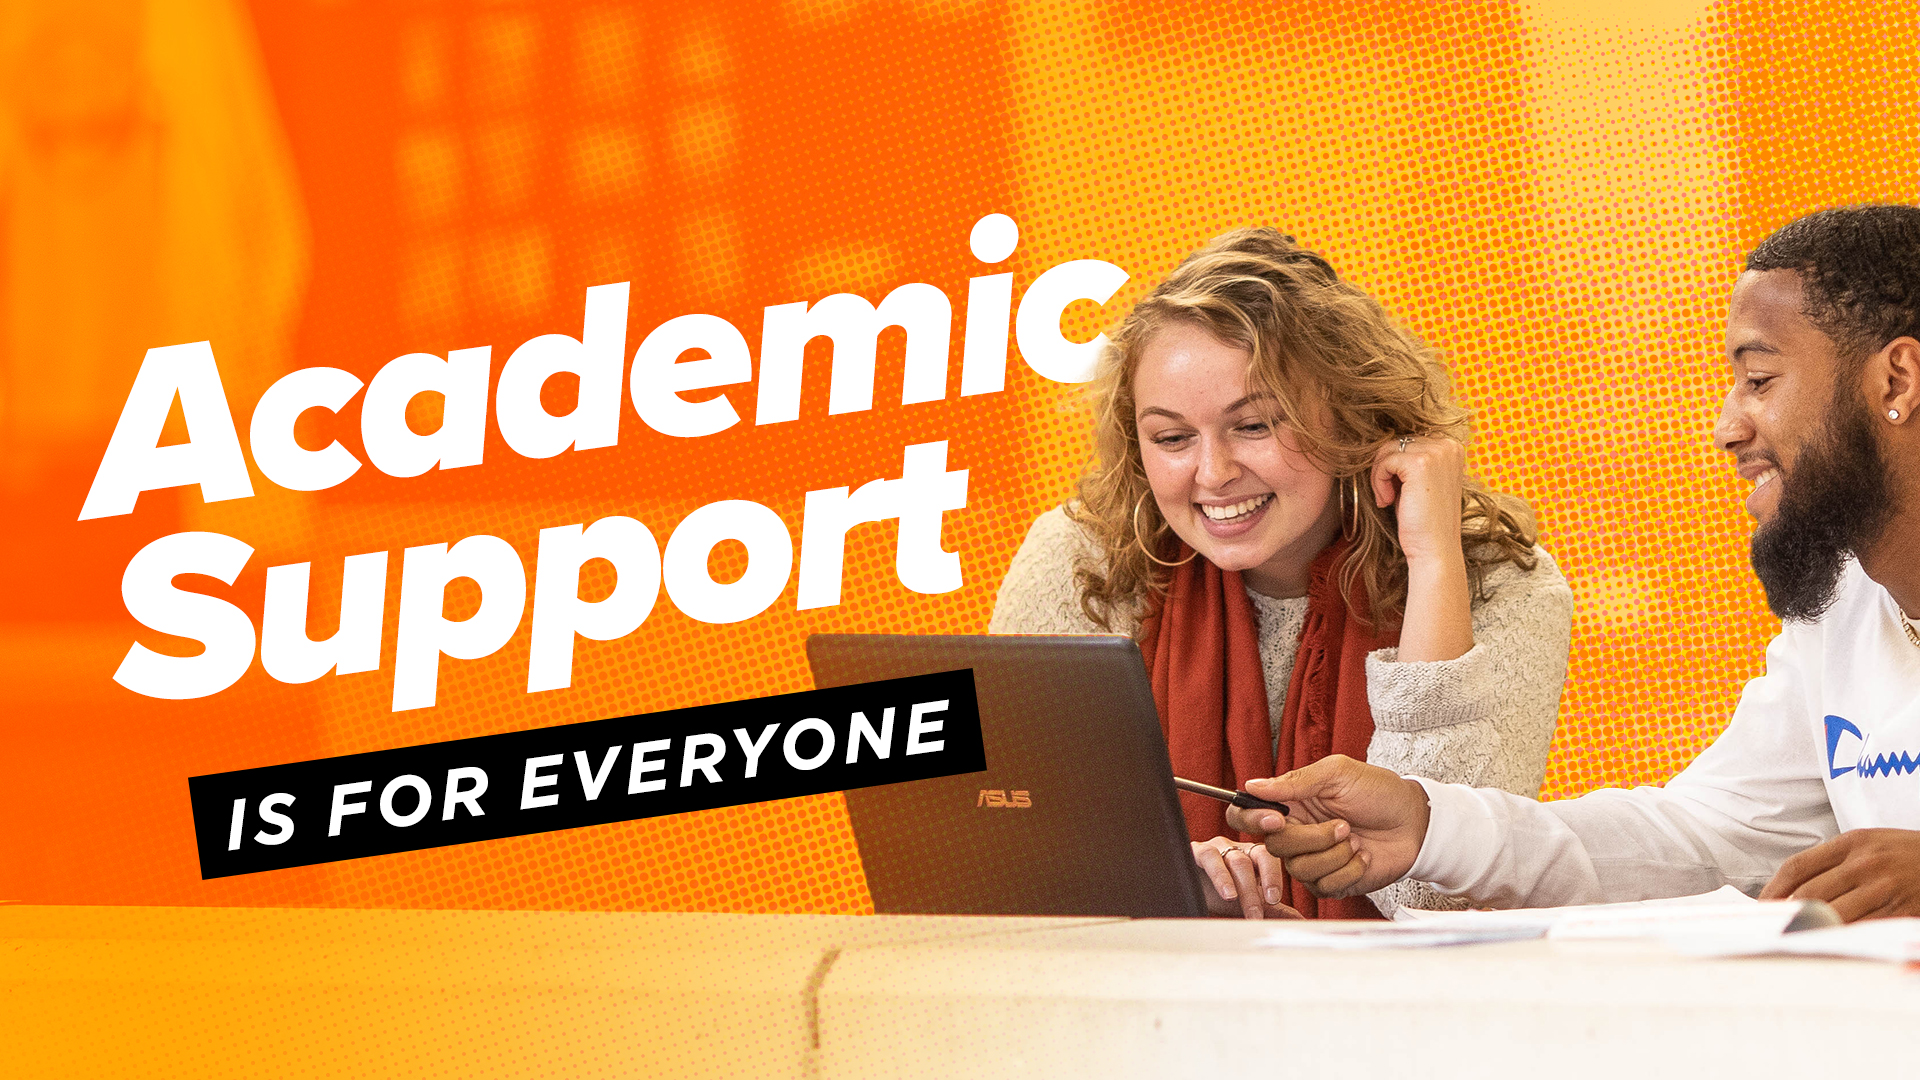 Academic Support is for Everyone